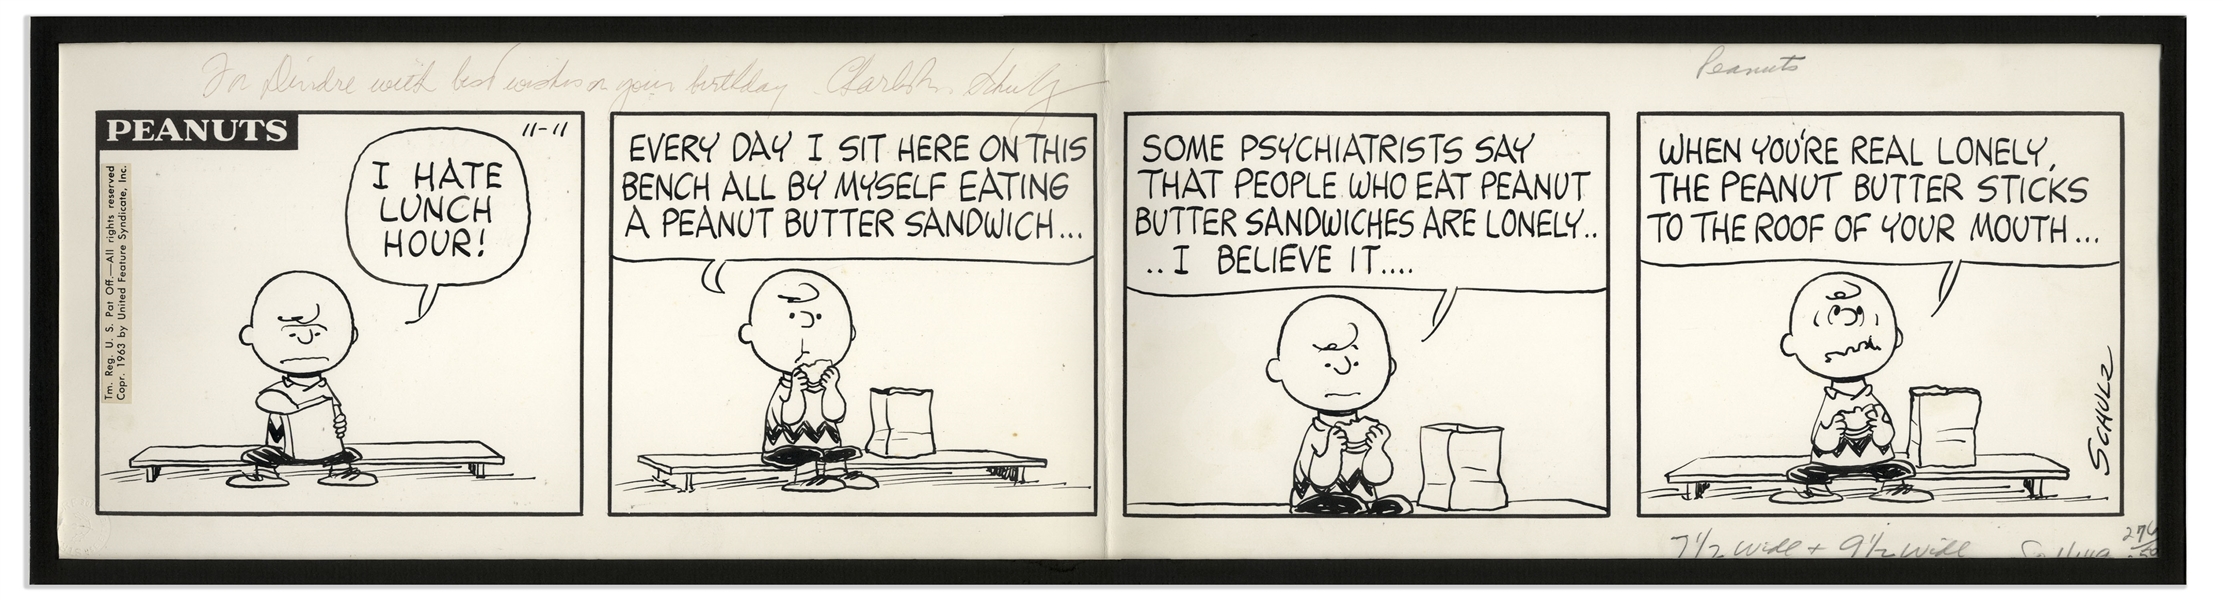 Charles Schulz Hand-Drawn ''Peanuts'' Comic Strip From 1963 Featuring Charlie Brown